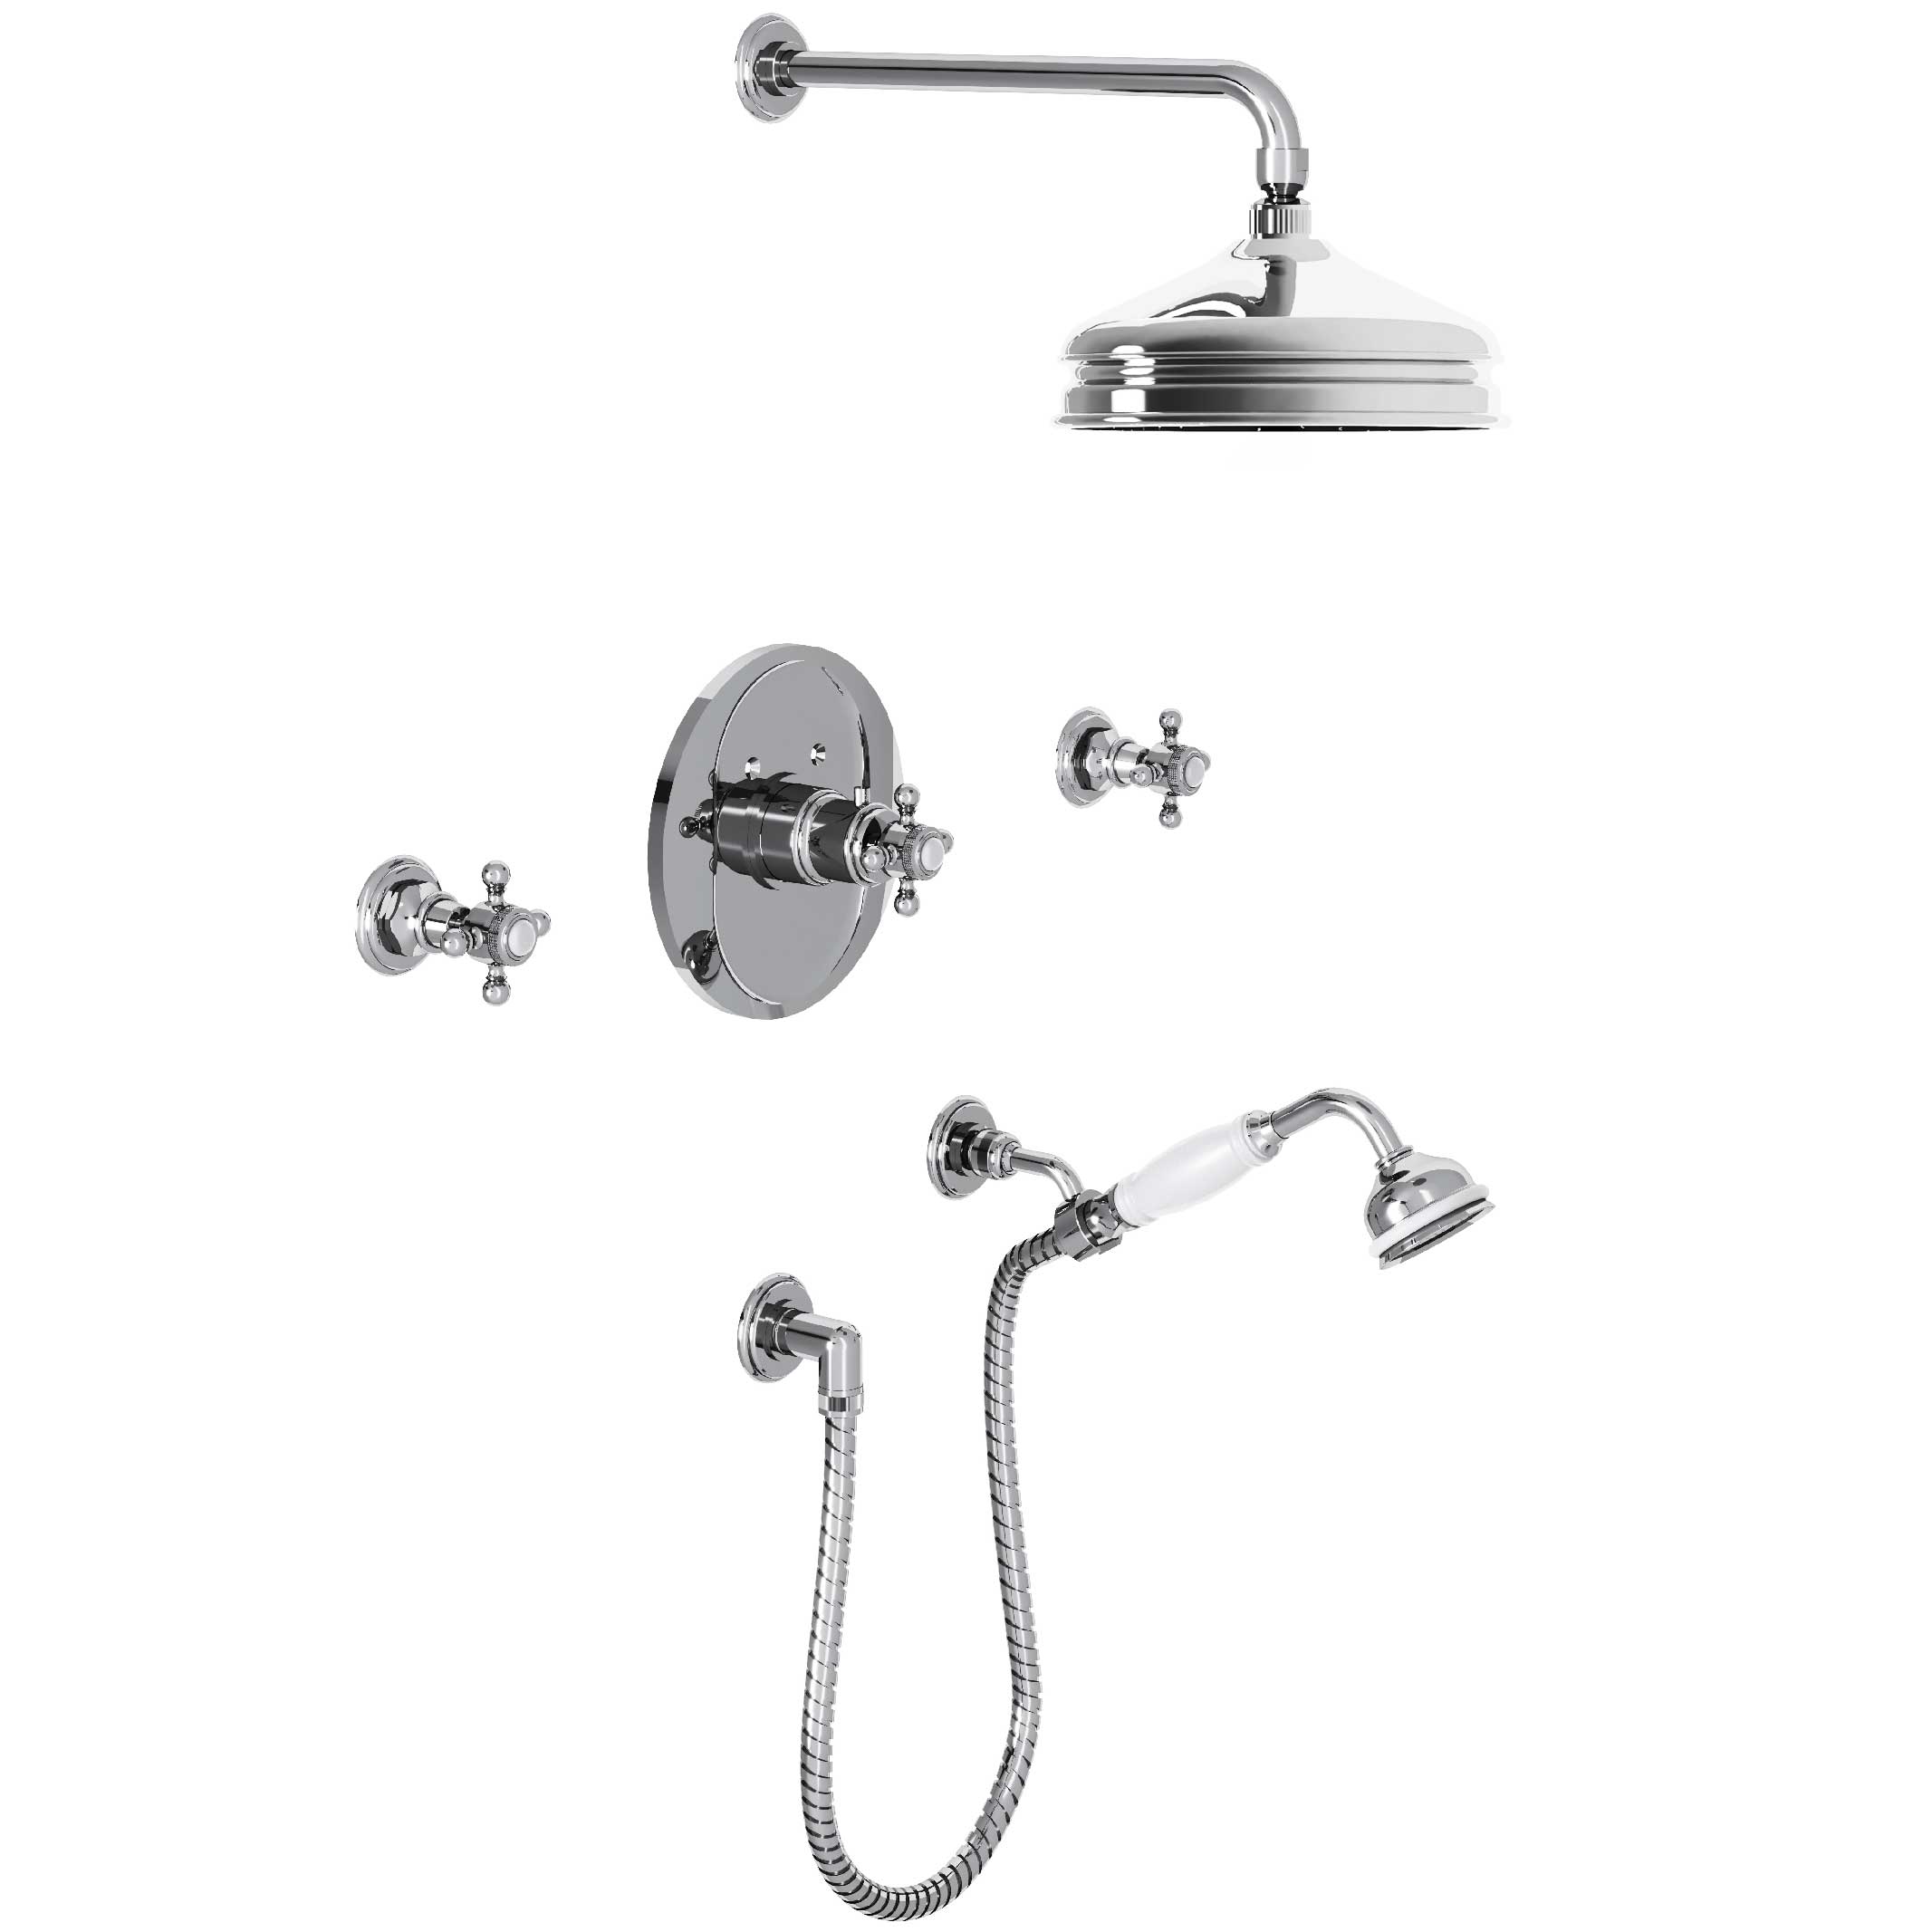 M20-2308T1 Thermostatic shower mixer package